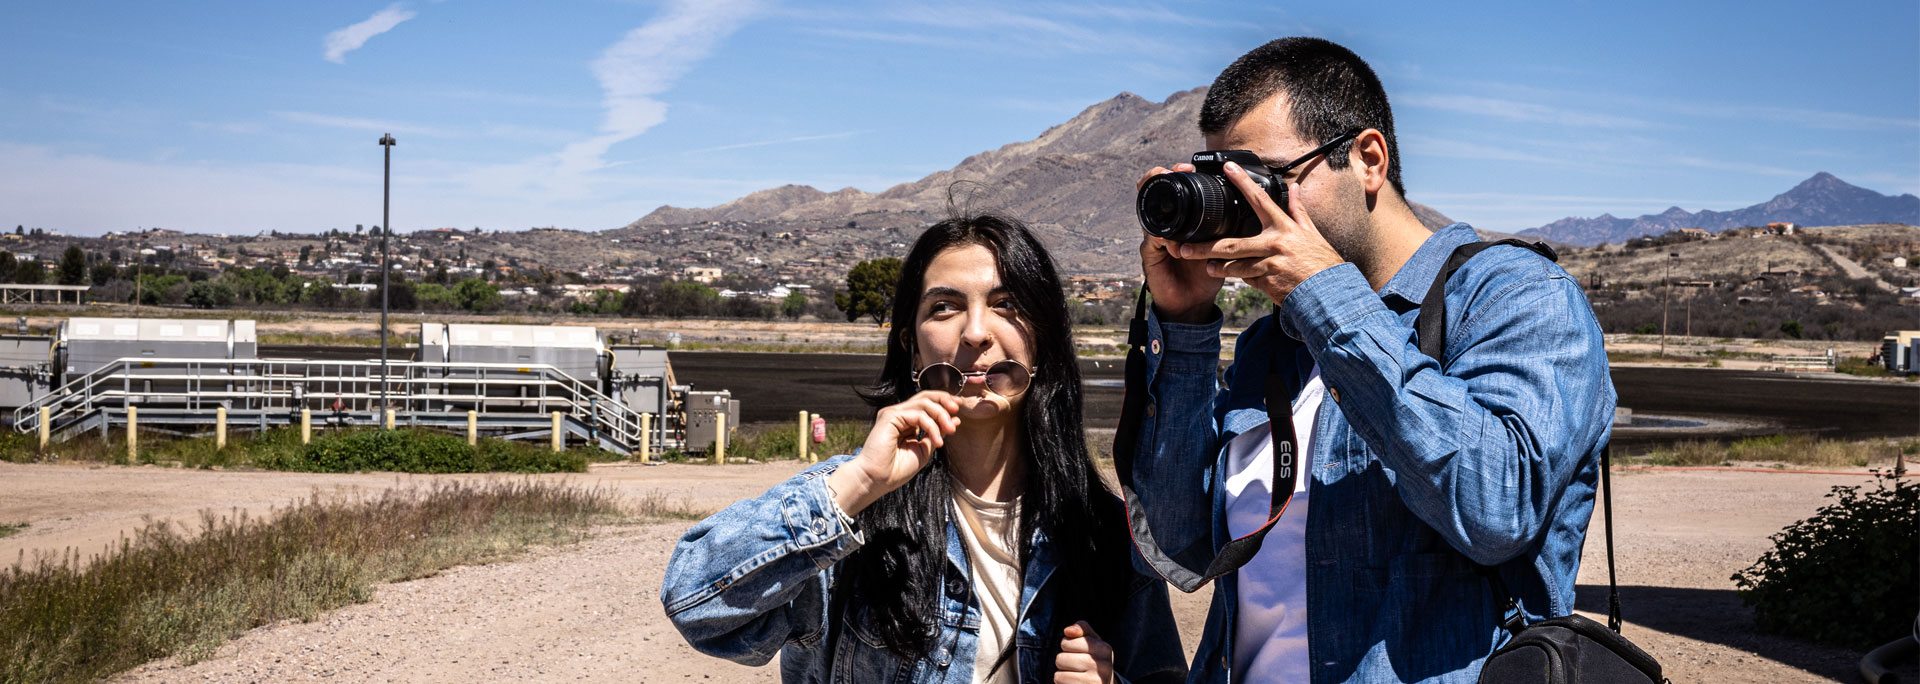 Andrès Martinez's advanced bilingual reporting course brings students together from ASU, Mexico to find the untold stories of the U.S.-Mexico border. photo by Charlie Leight/Arizona State University